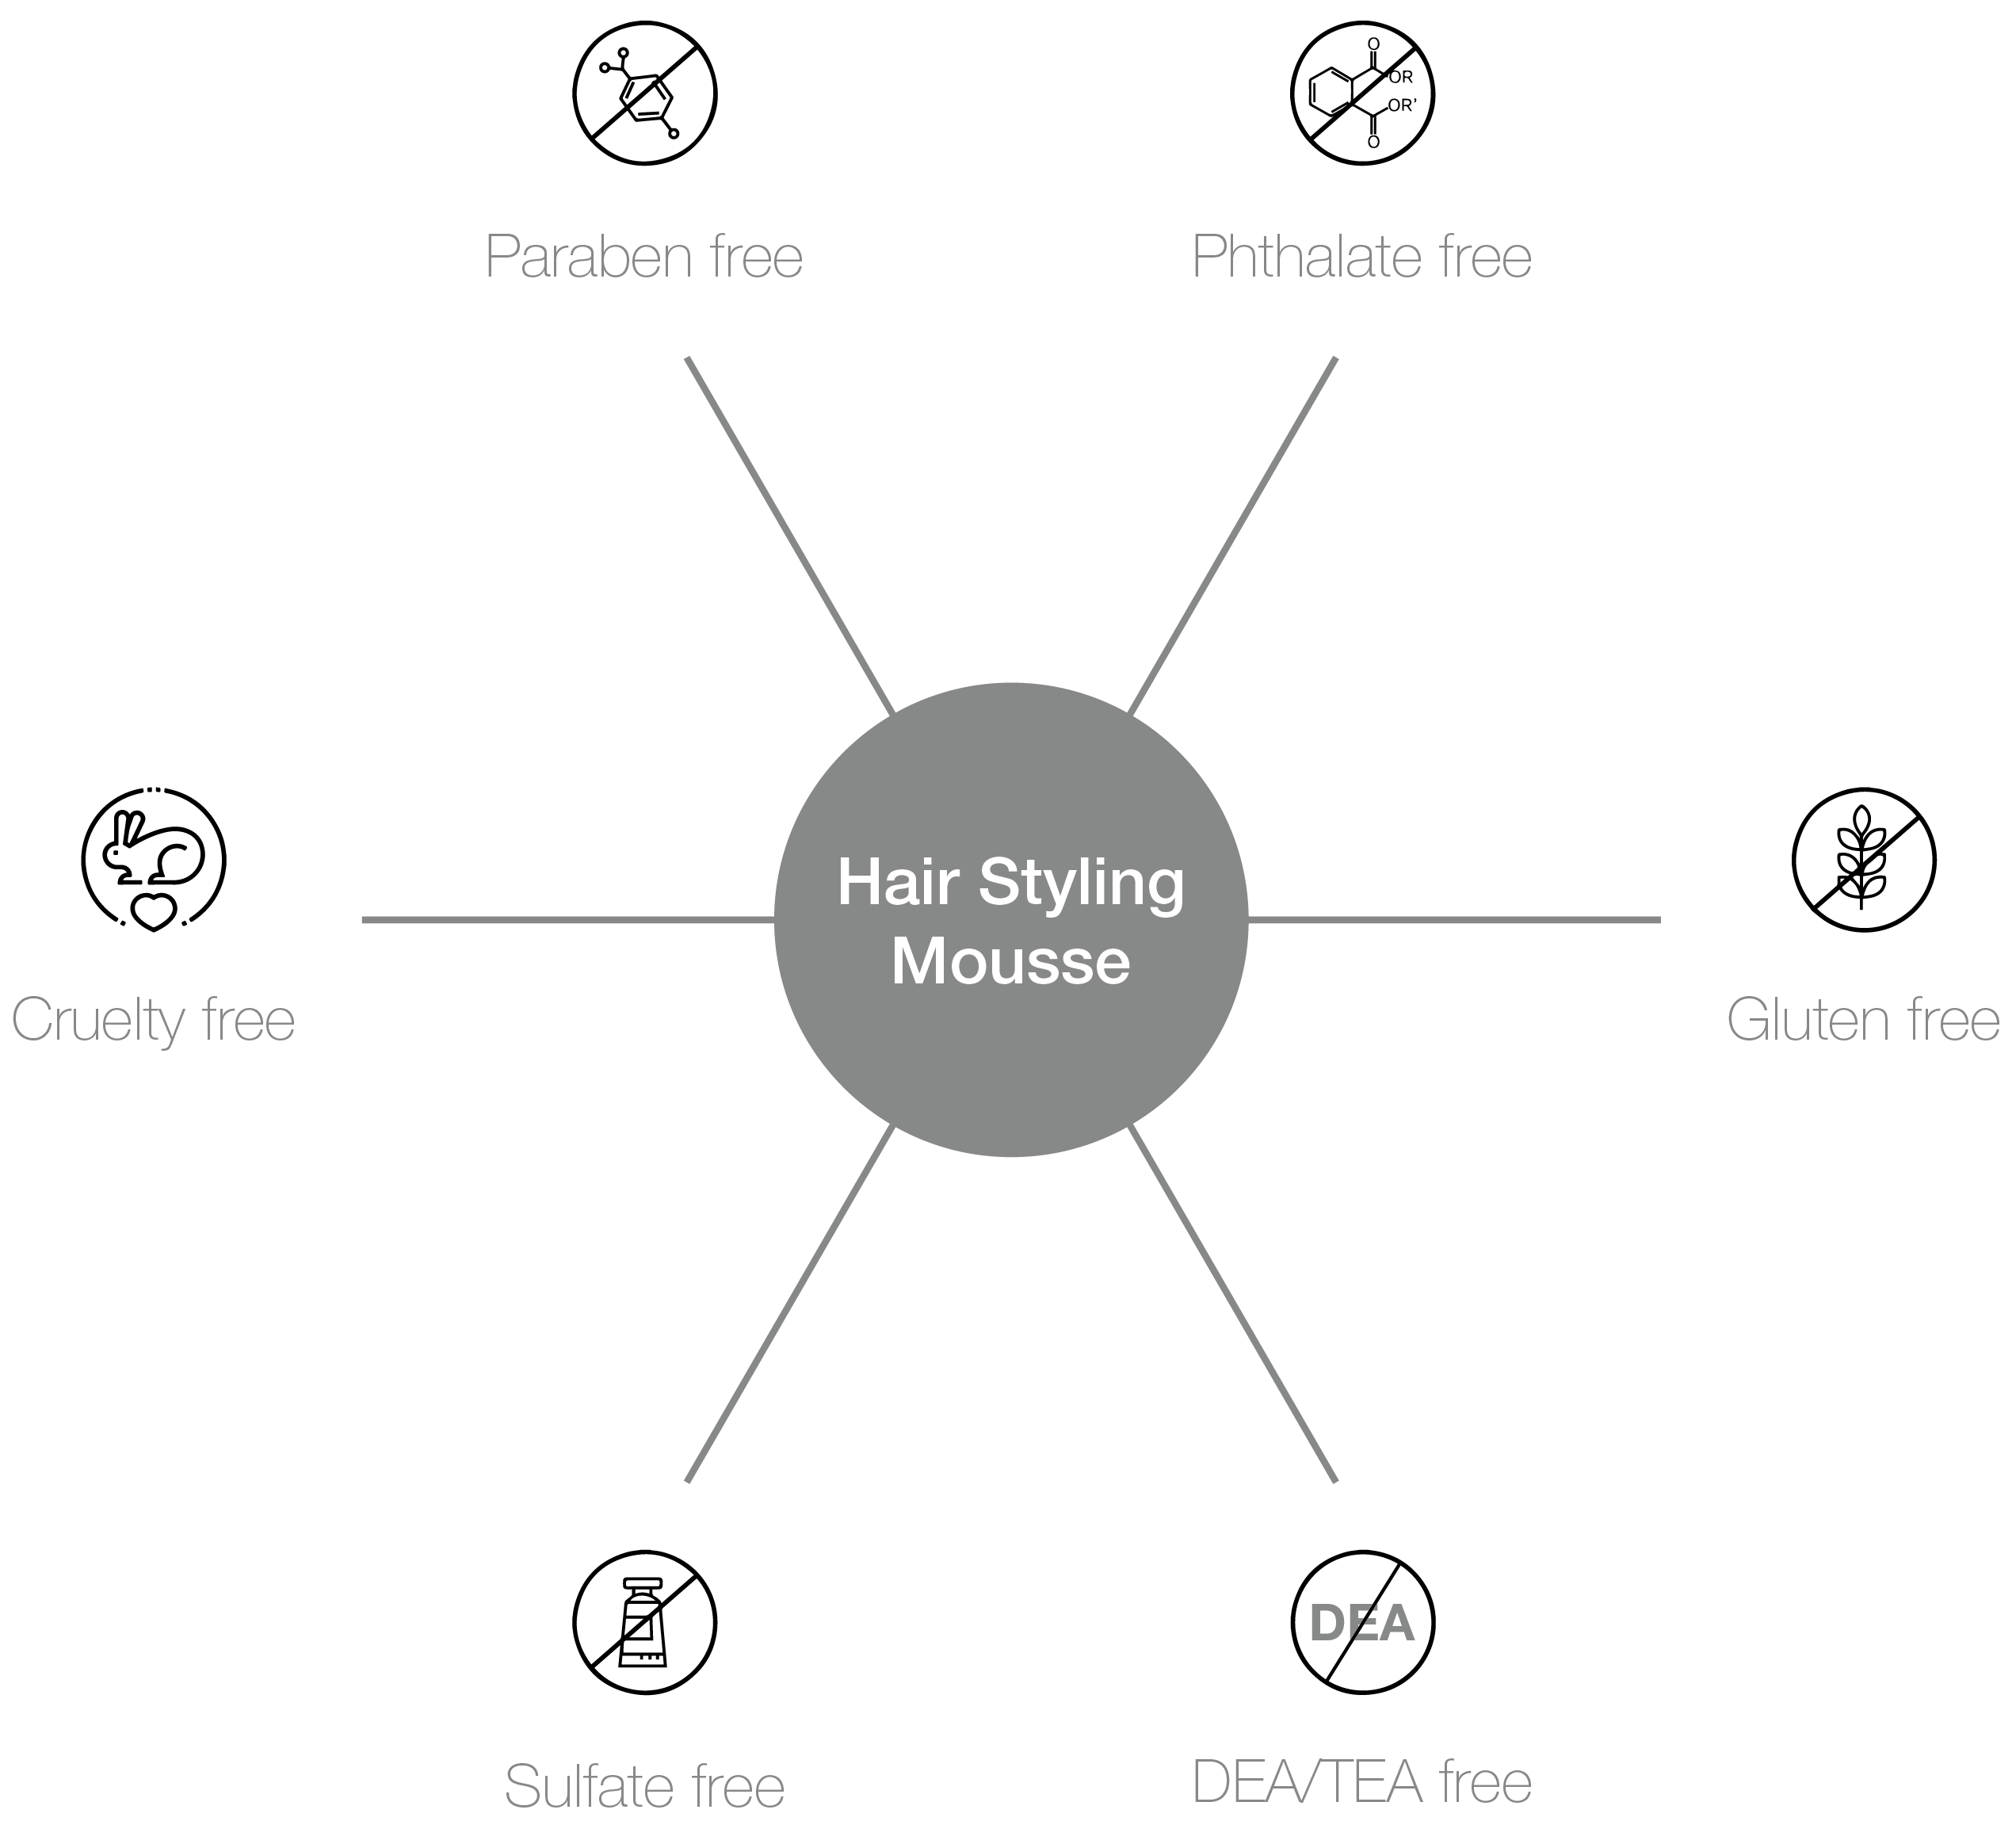 Hair Styling Mousse Pro-benefits